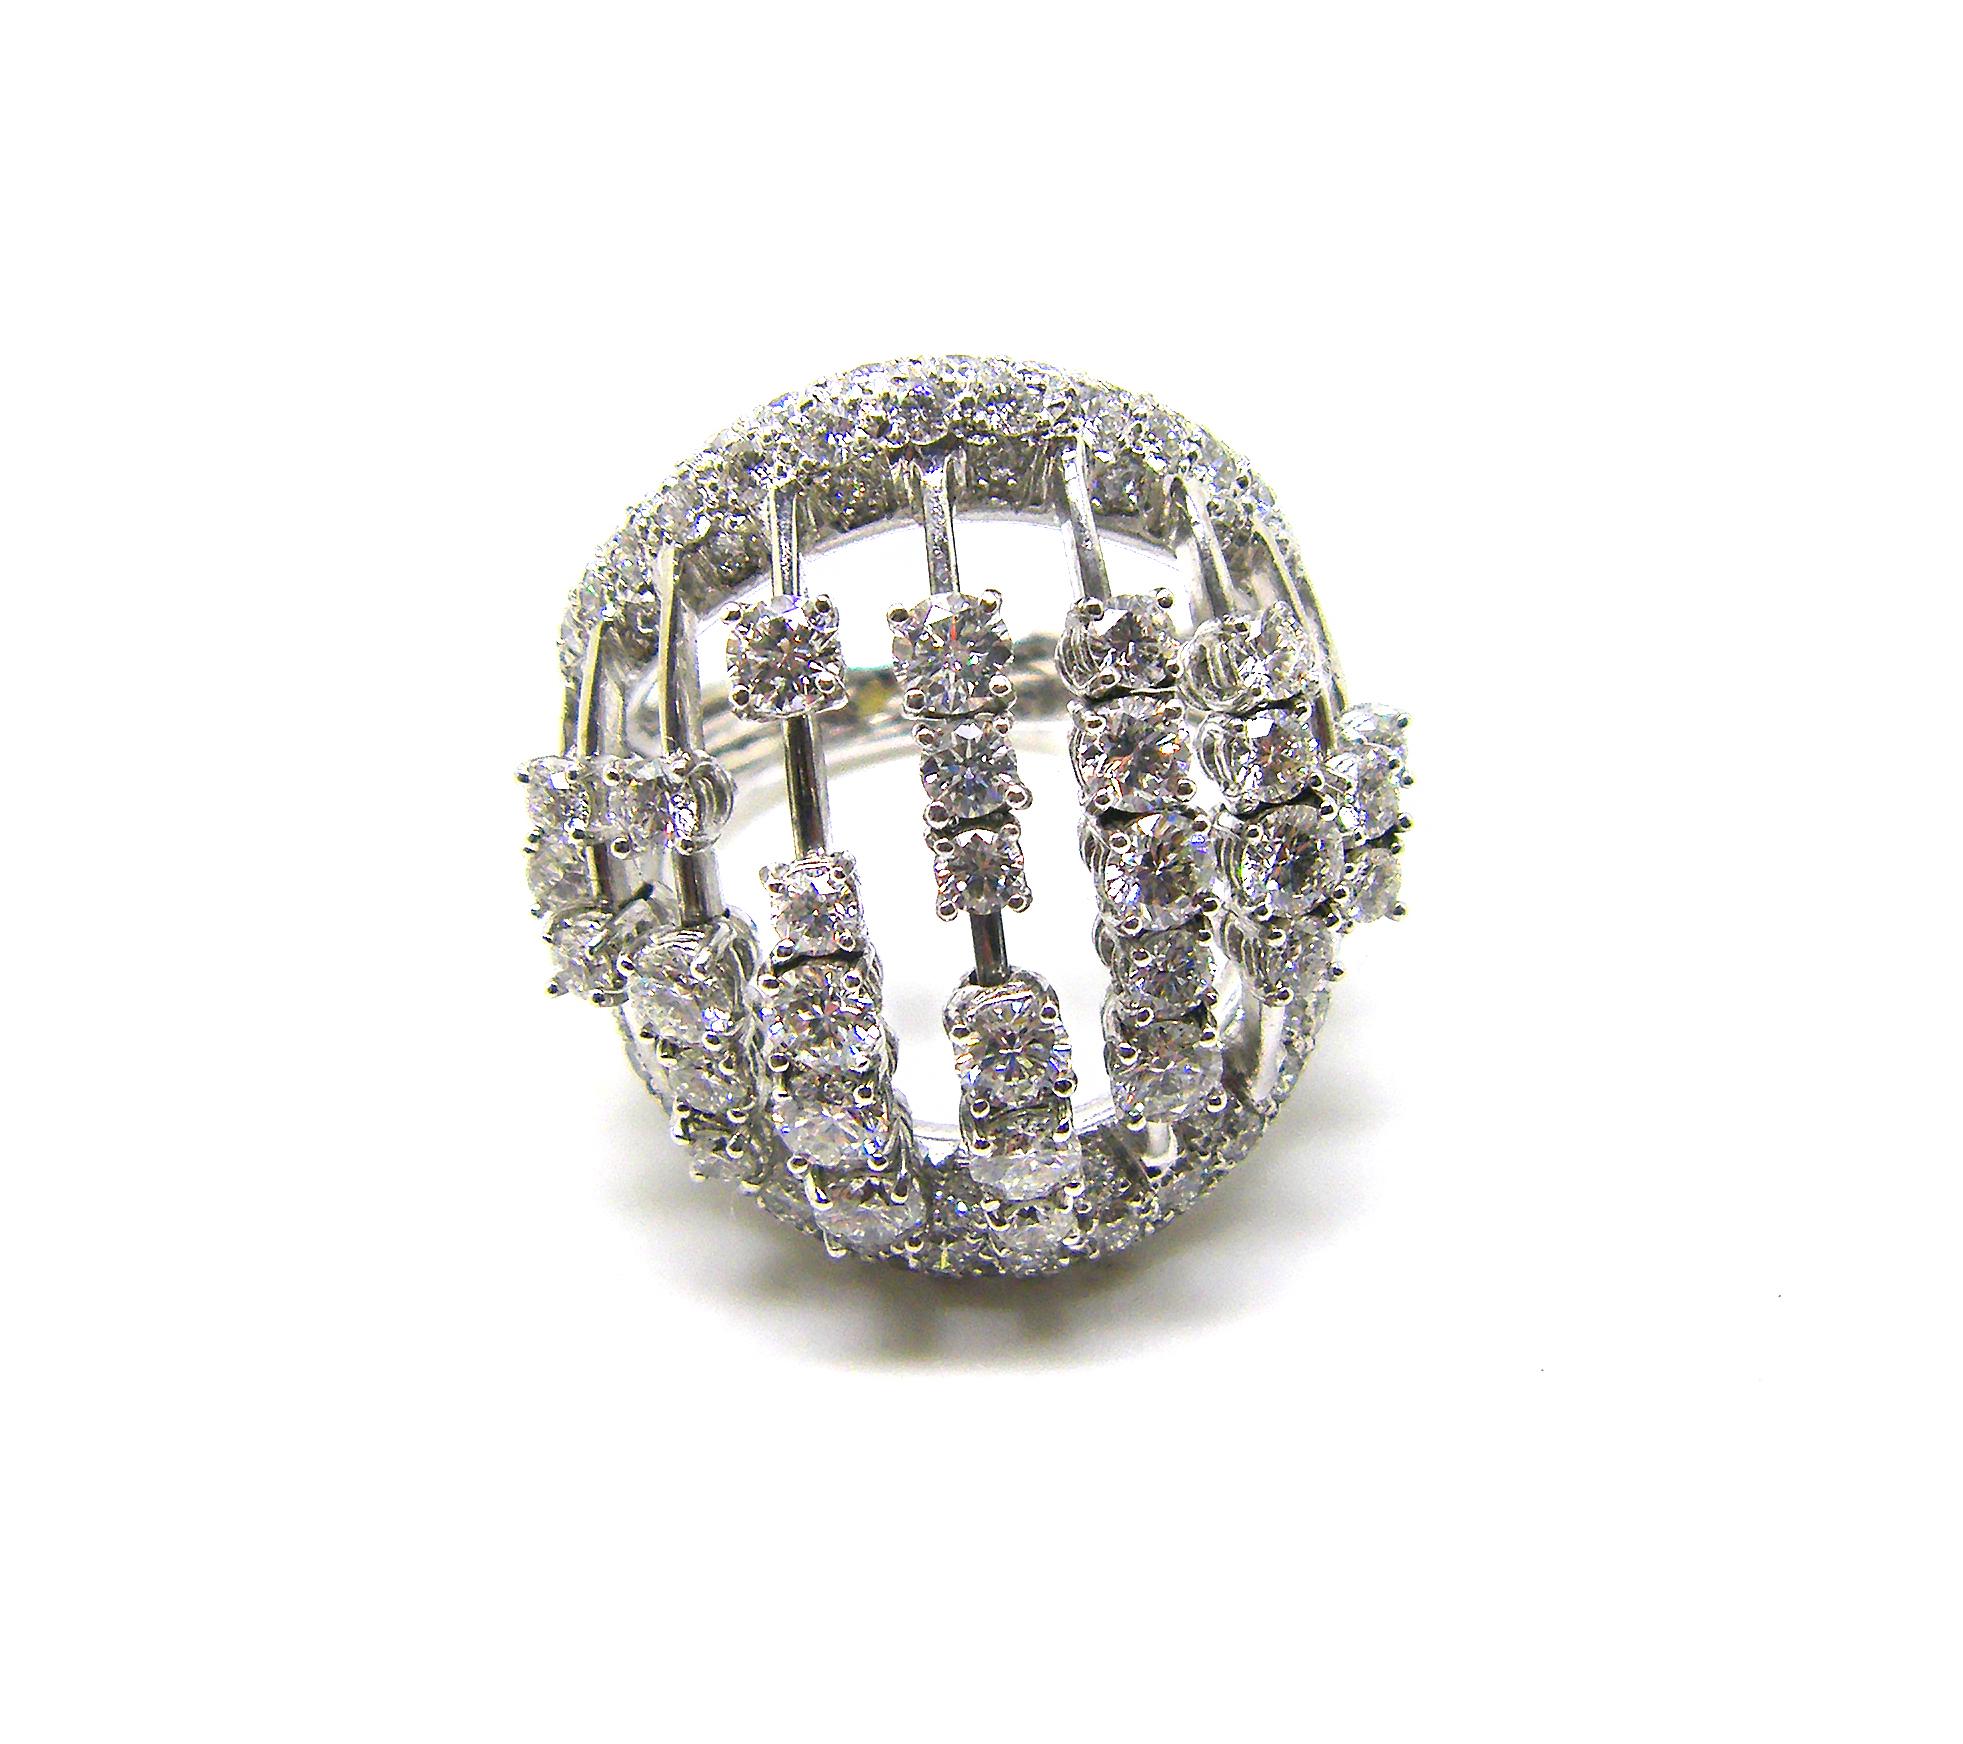 S.Georgios designer 18 Karat White Gold Brilliant Cut Diamond Wide Dome Ring is all handmade in unique many rows of loose diamonds design. The gorgeous ring features 9 (nine) rows of big brilliant cut white diamonds that move with a total weight of